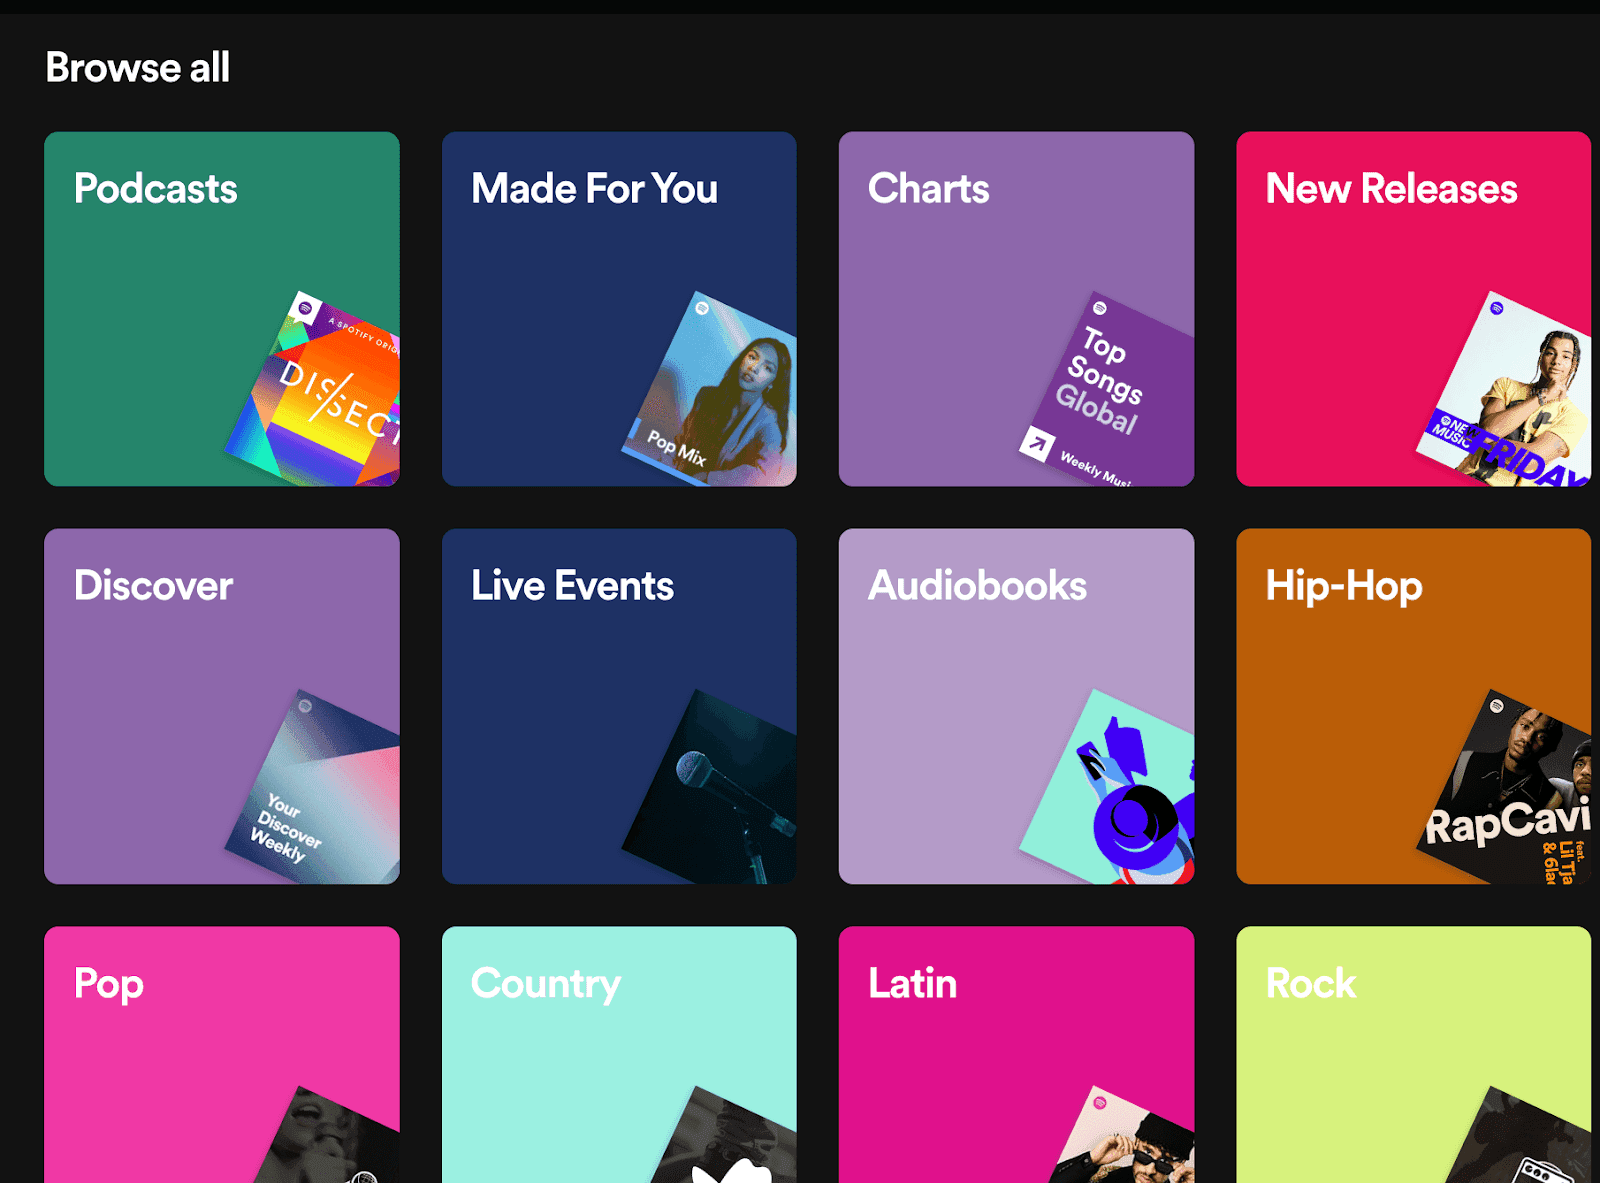 Spotify has many categories, podcasts, and even live events for listeners to use